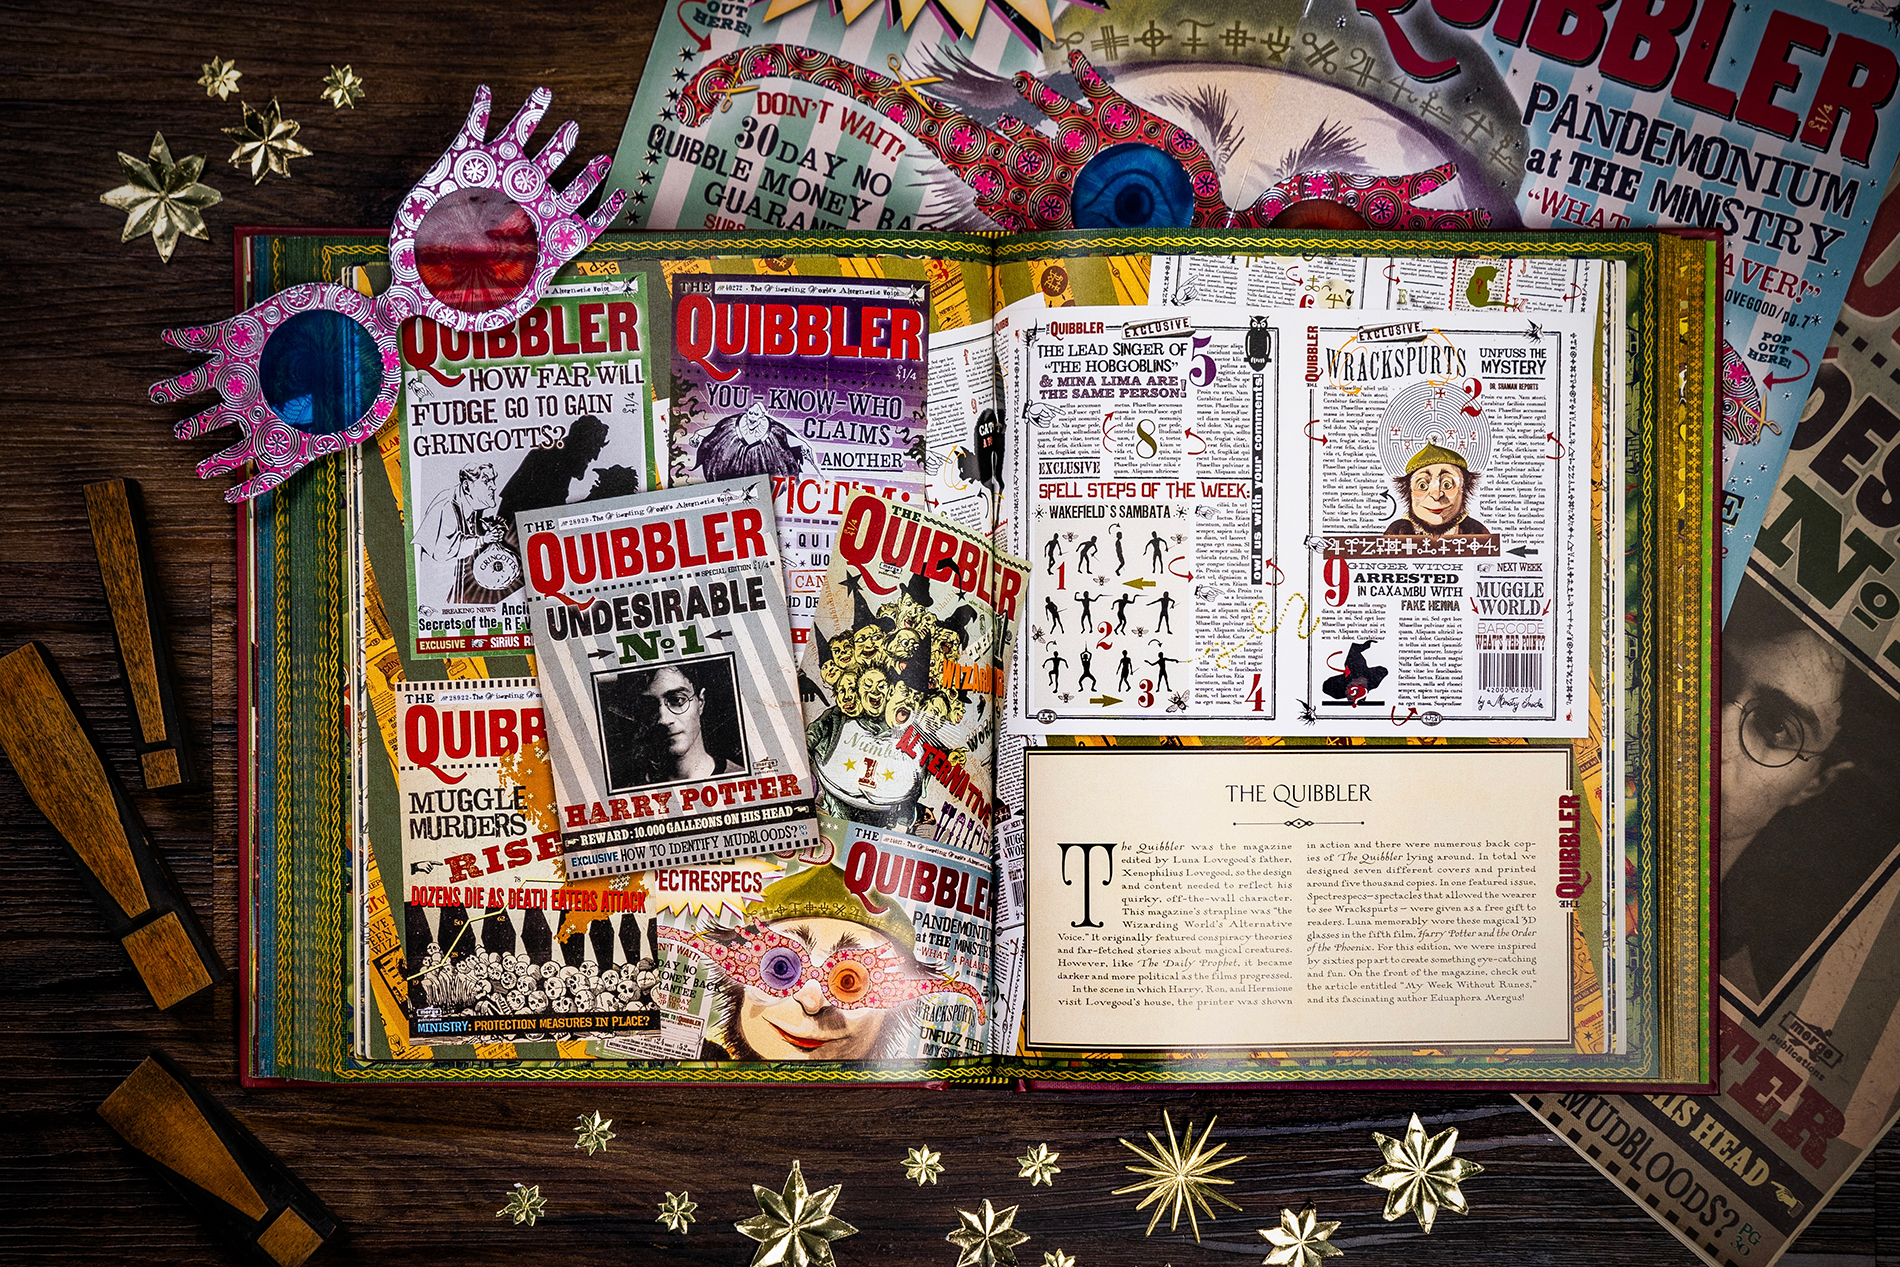 Our new book The Magic of MinaLima is divided in three volumes